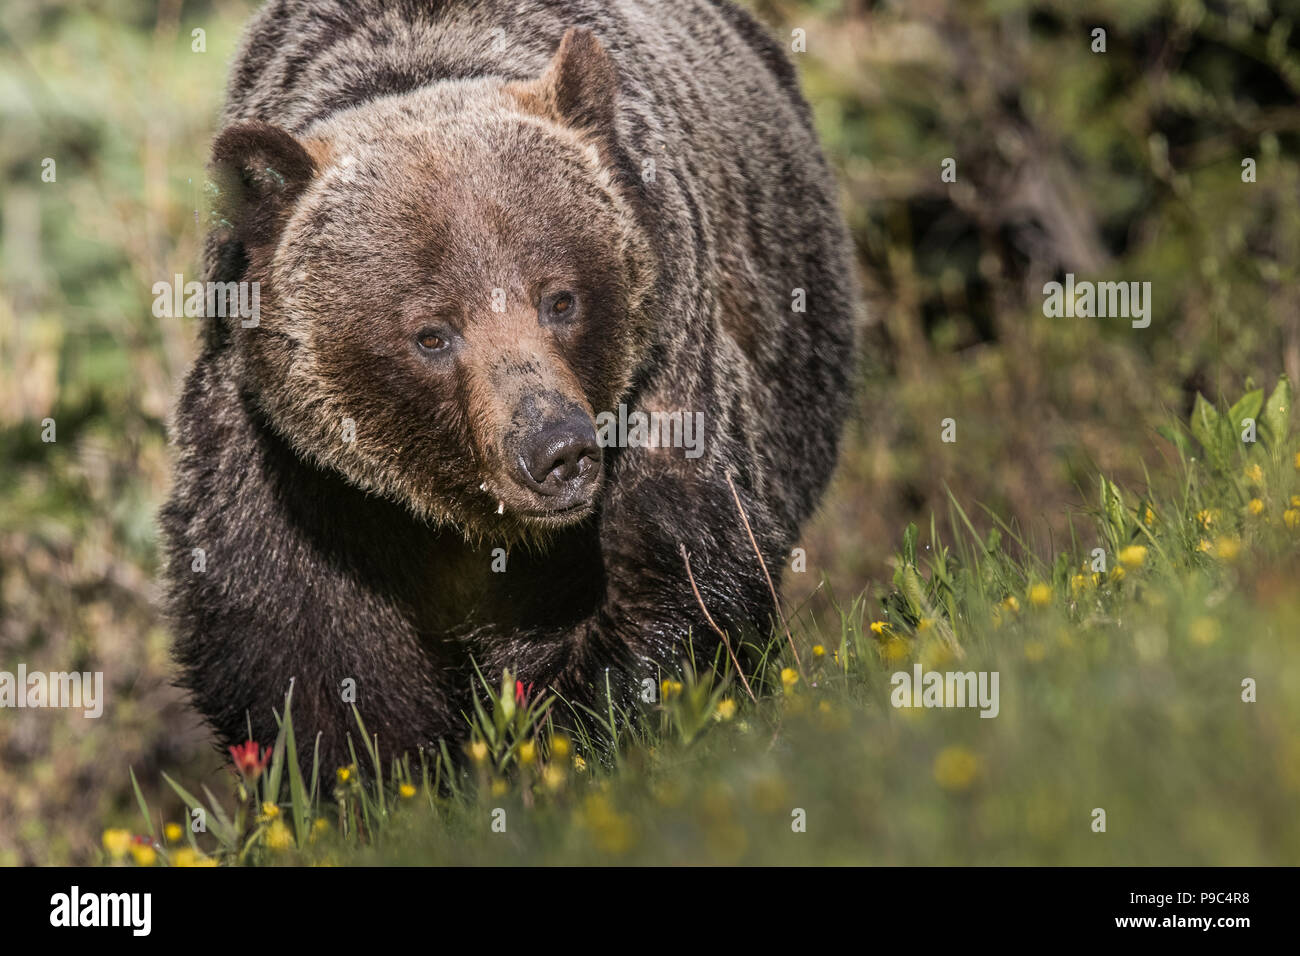 Grizzly Bear Female (Ursus arctos horribilis) Head on, eye level, shot of female grizzly, in dandelion field. Stock Photo